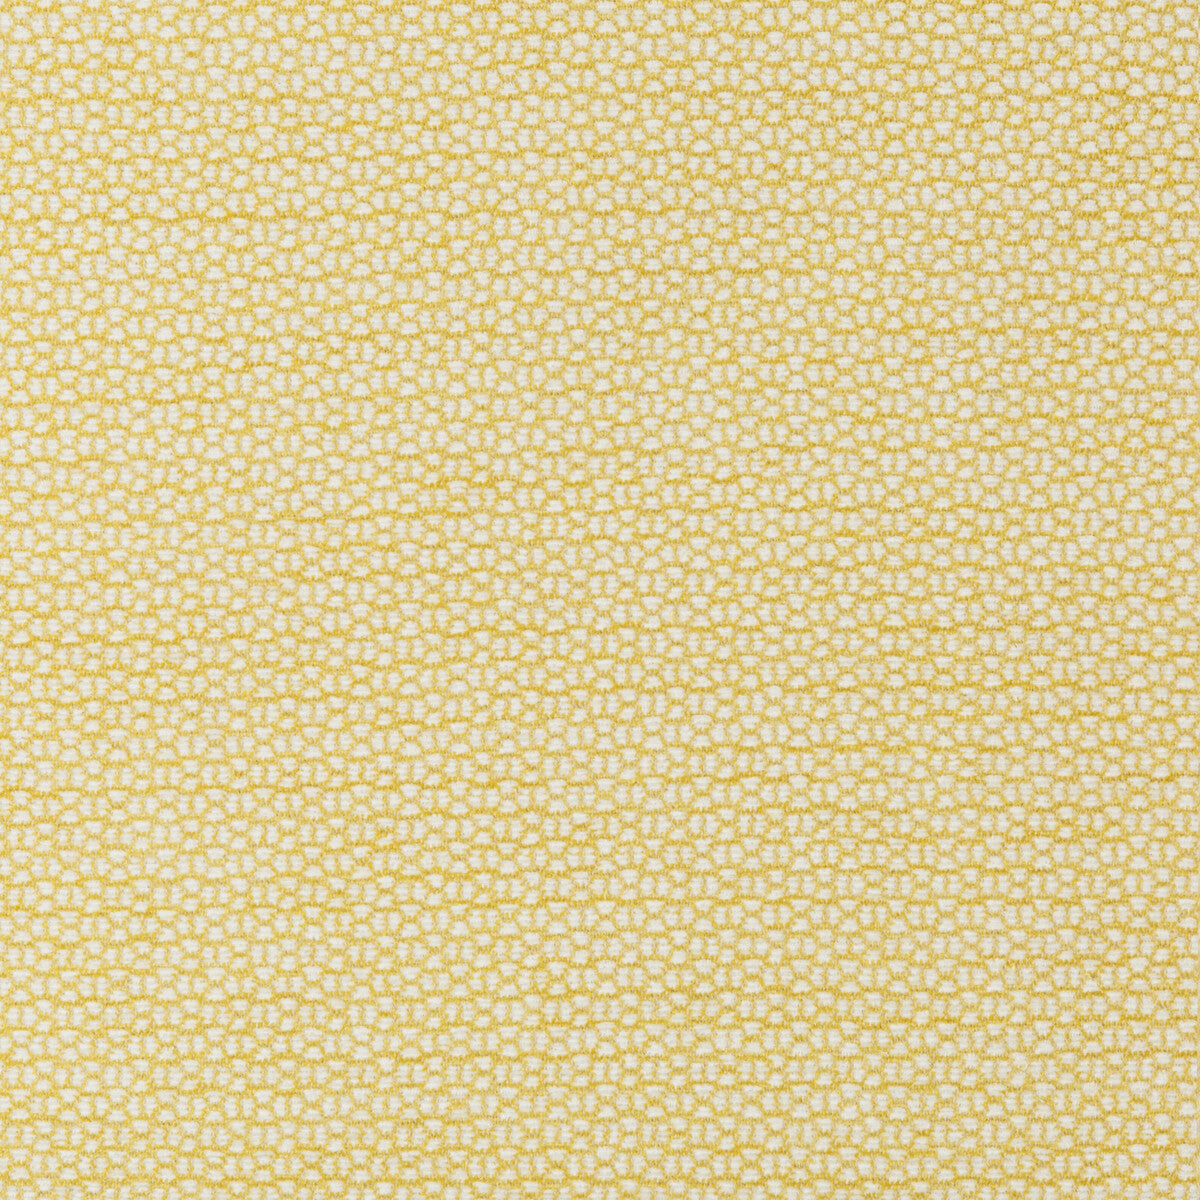 Marolay Texture fabric in canary color - pattern 8019144.4.0 - by Brunschwig &amp; Fils in the Chambery Textures II collection